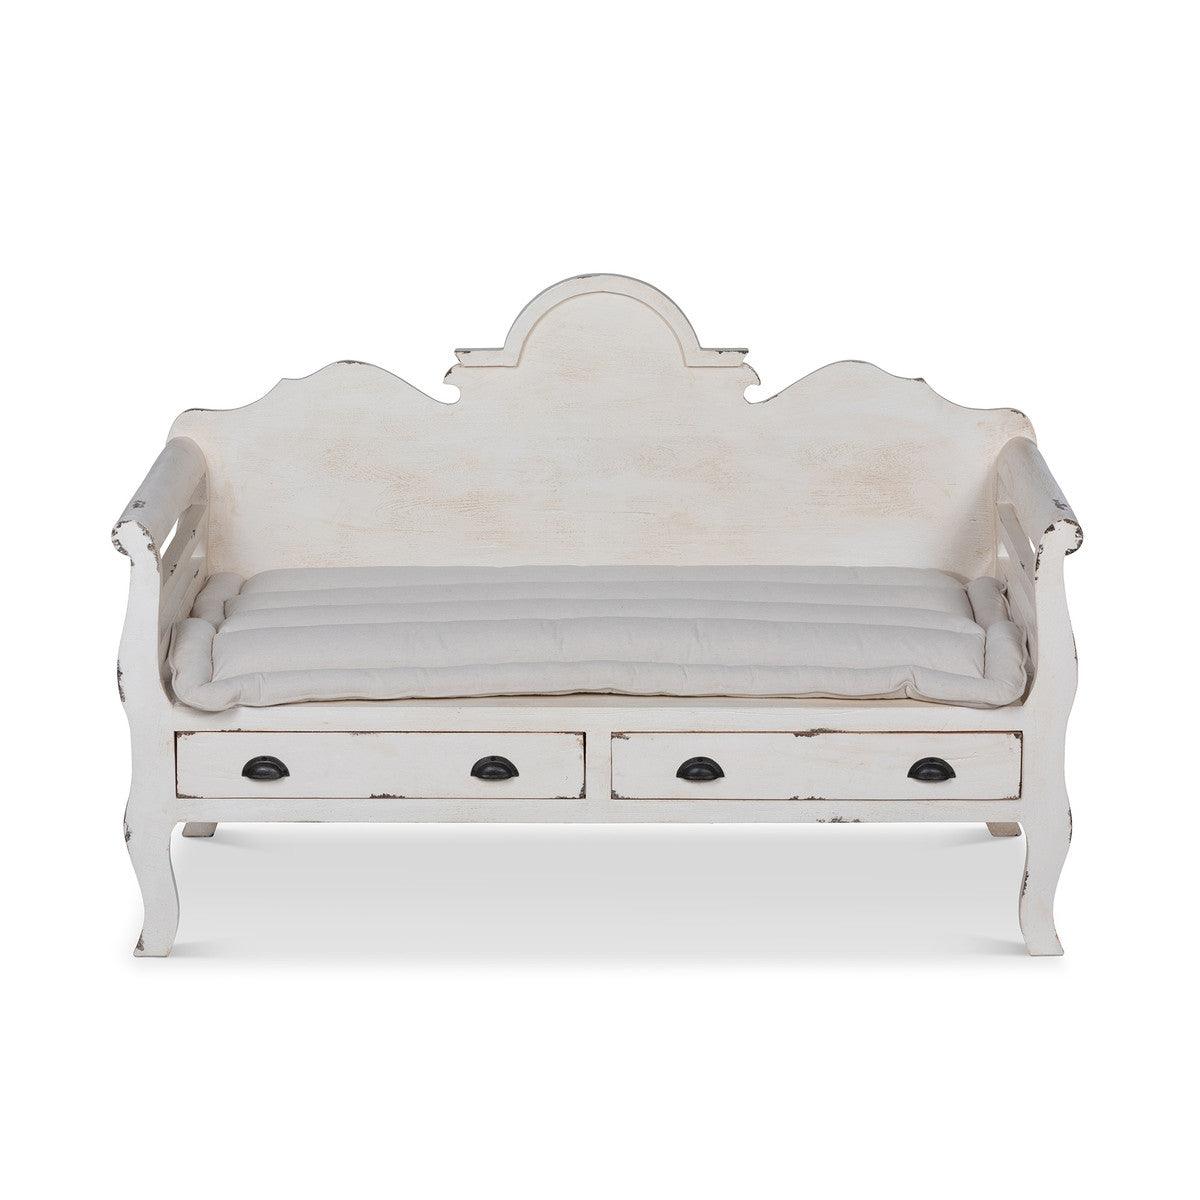 Toulon Wooden Bench - Signastyle Boutique